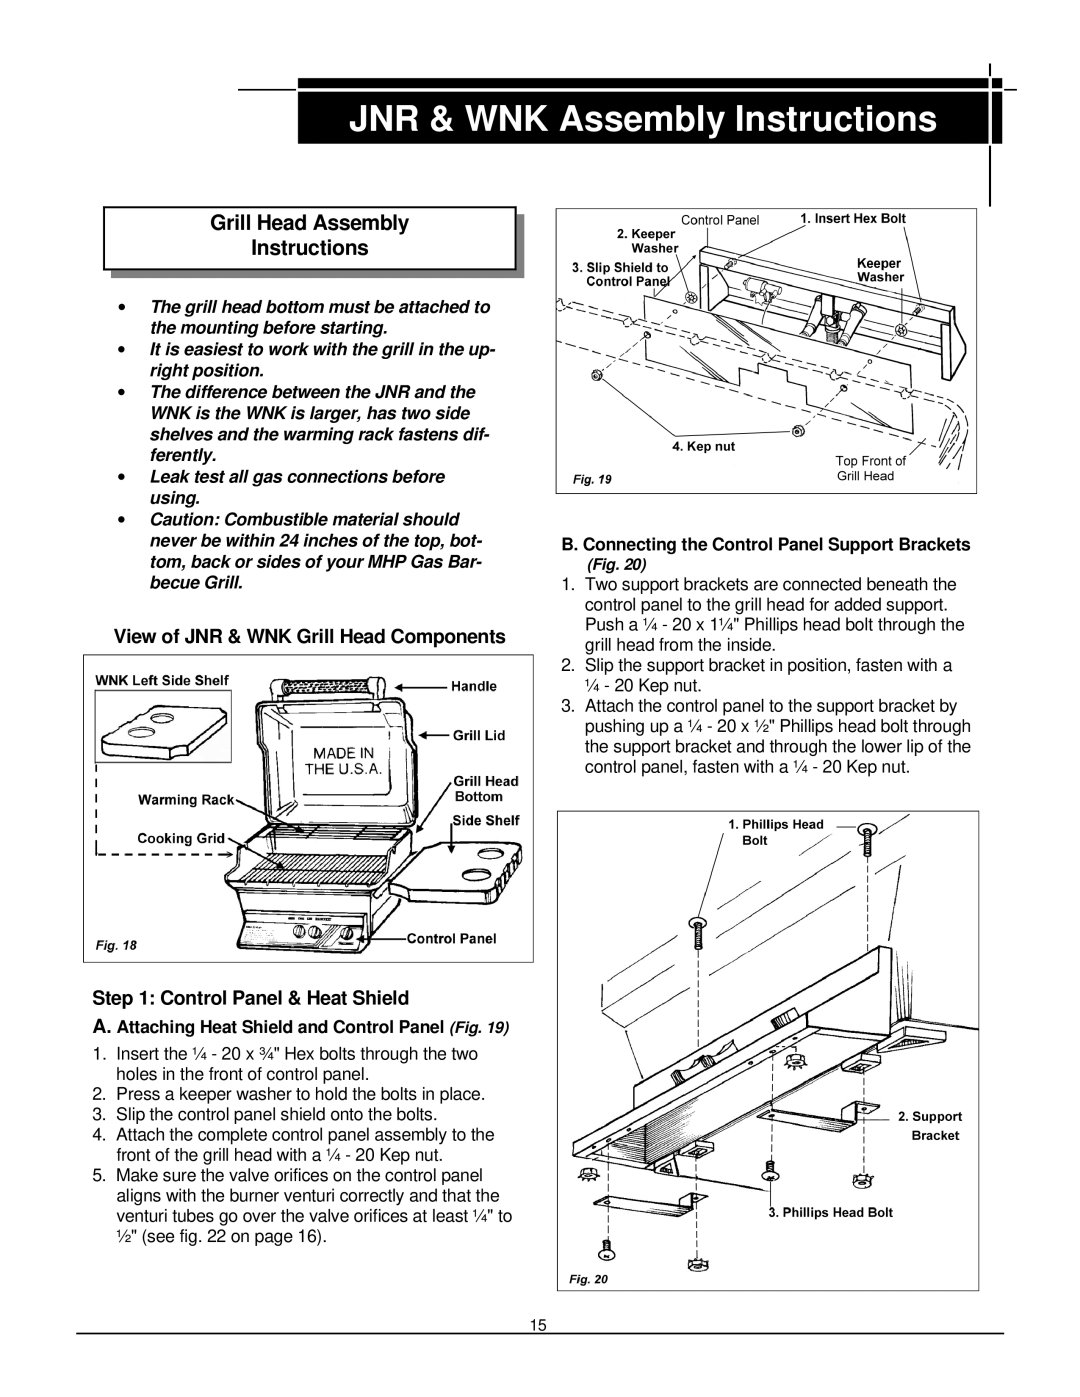 MHP TJK Grill Head Assembly Instructions, View of JNR & WNK Grill Head Components, Control Panel & Heat Shield 